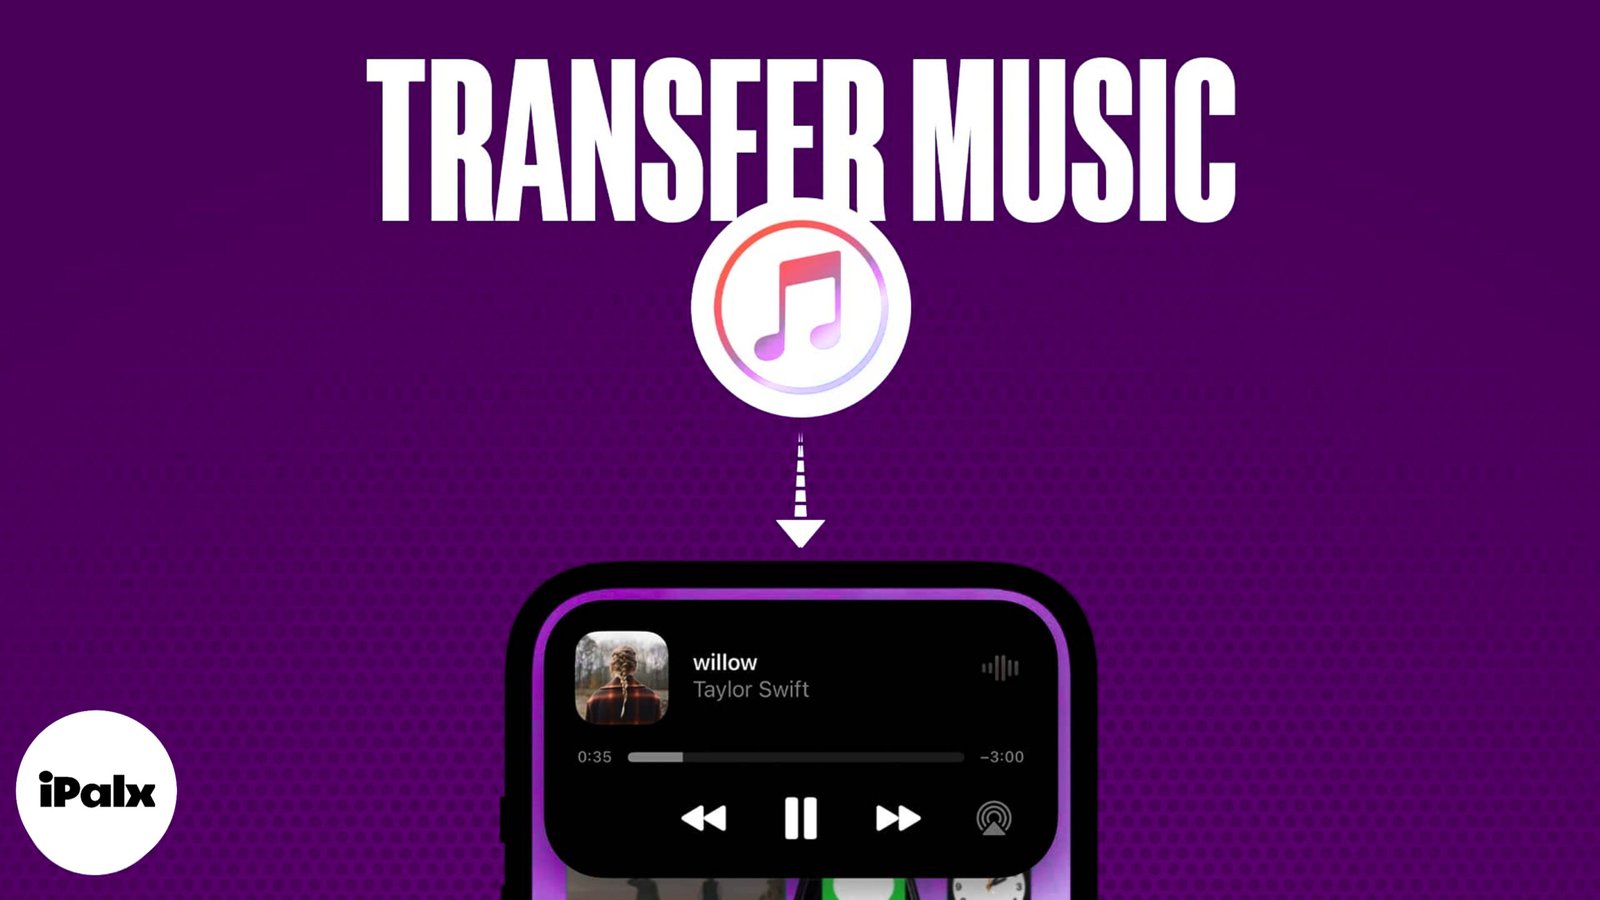 How to transfer music from iTunes to an iPhone: Explain three methods.